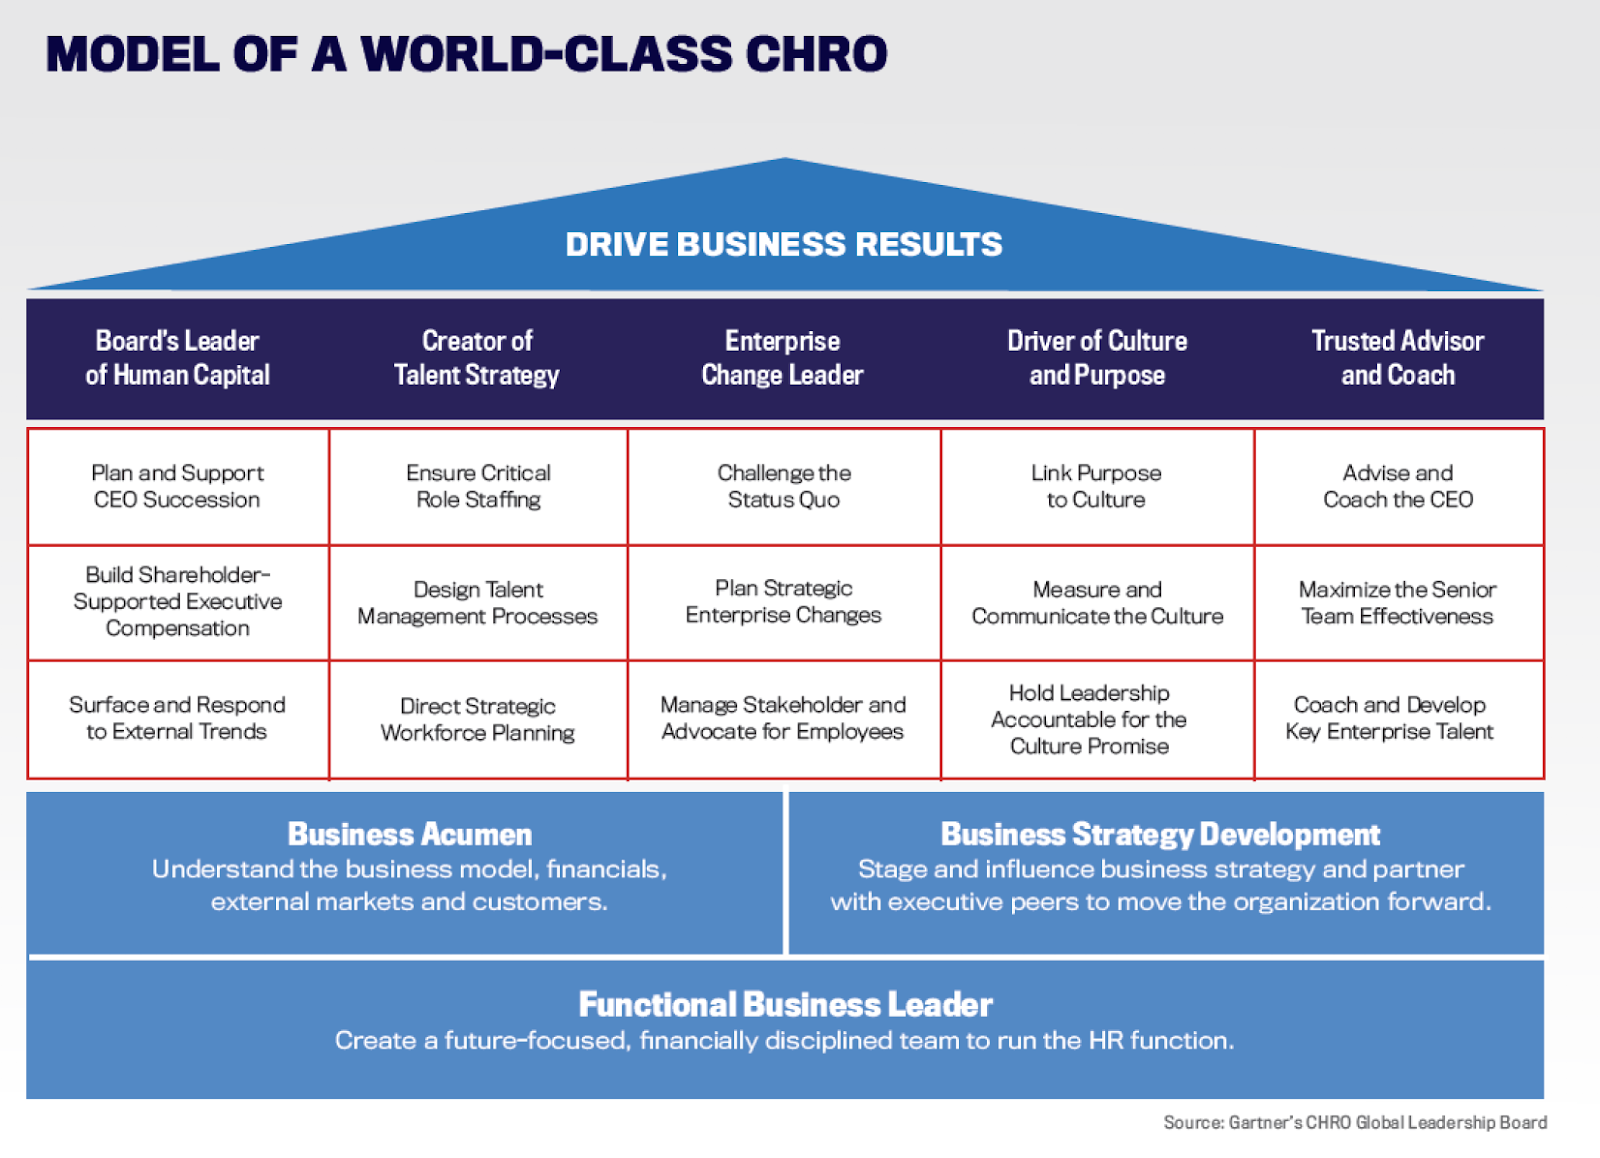 pillars of success for your CHRO